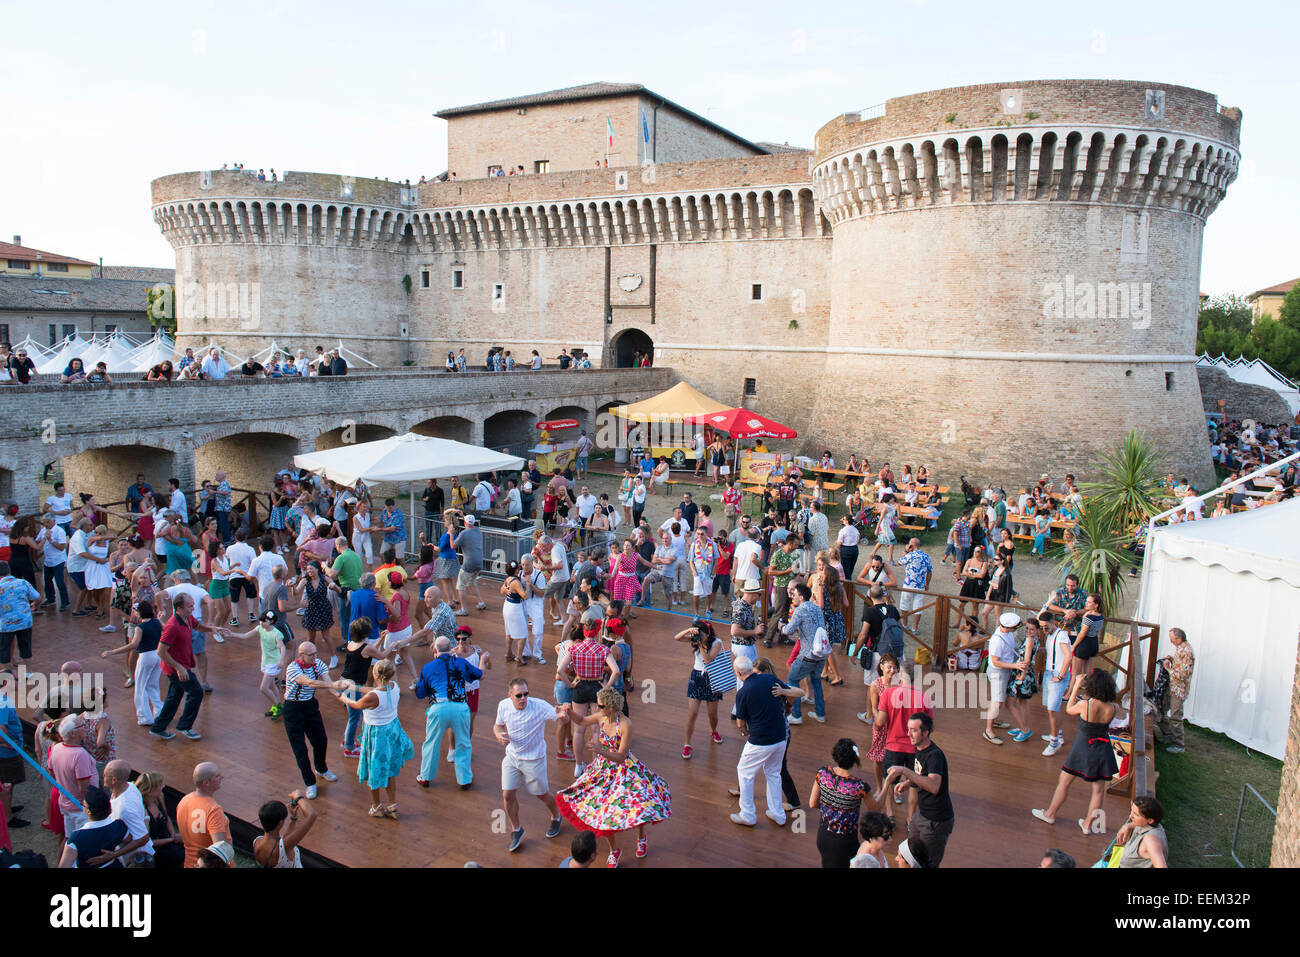 People dancing in the festival grounds in front of Fortress Rocca Roveresca, Summer Jamboree, Rock 'n' Roll Festival, Senigallia Stock Photo